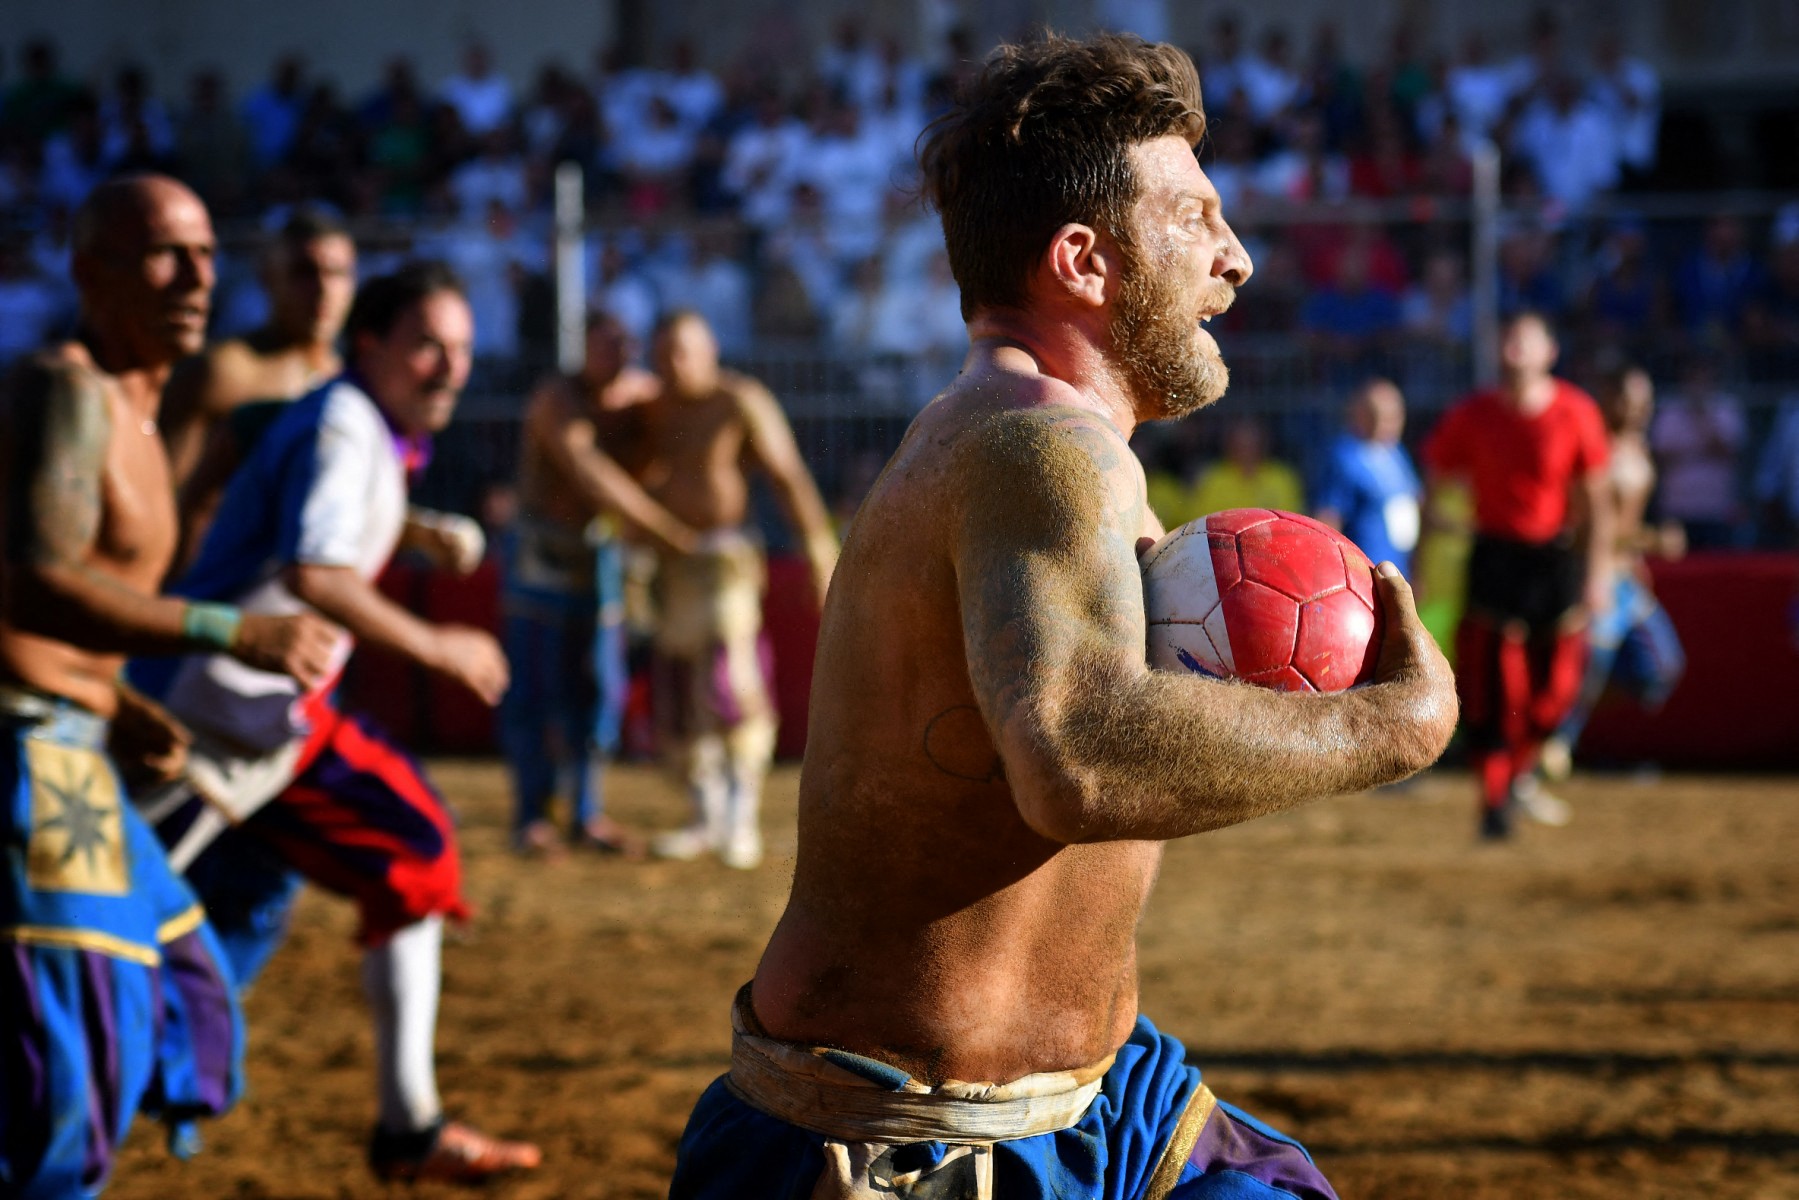 Players pictured during a Calcio Storico match in Florence